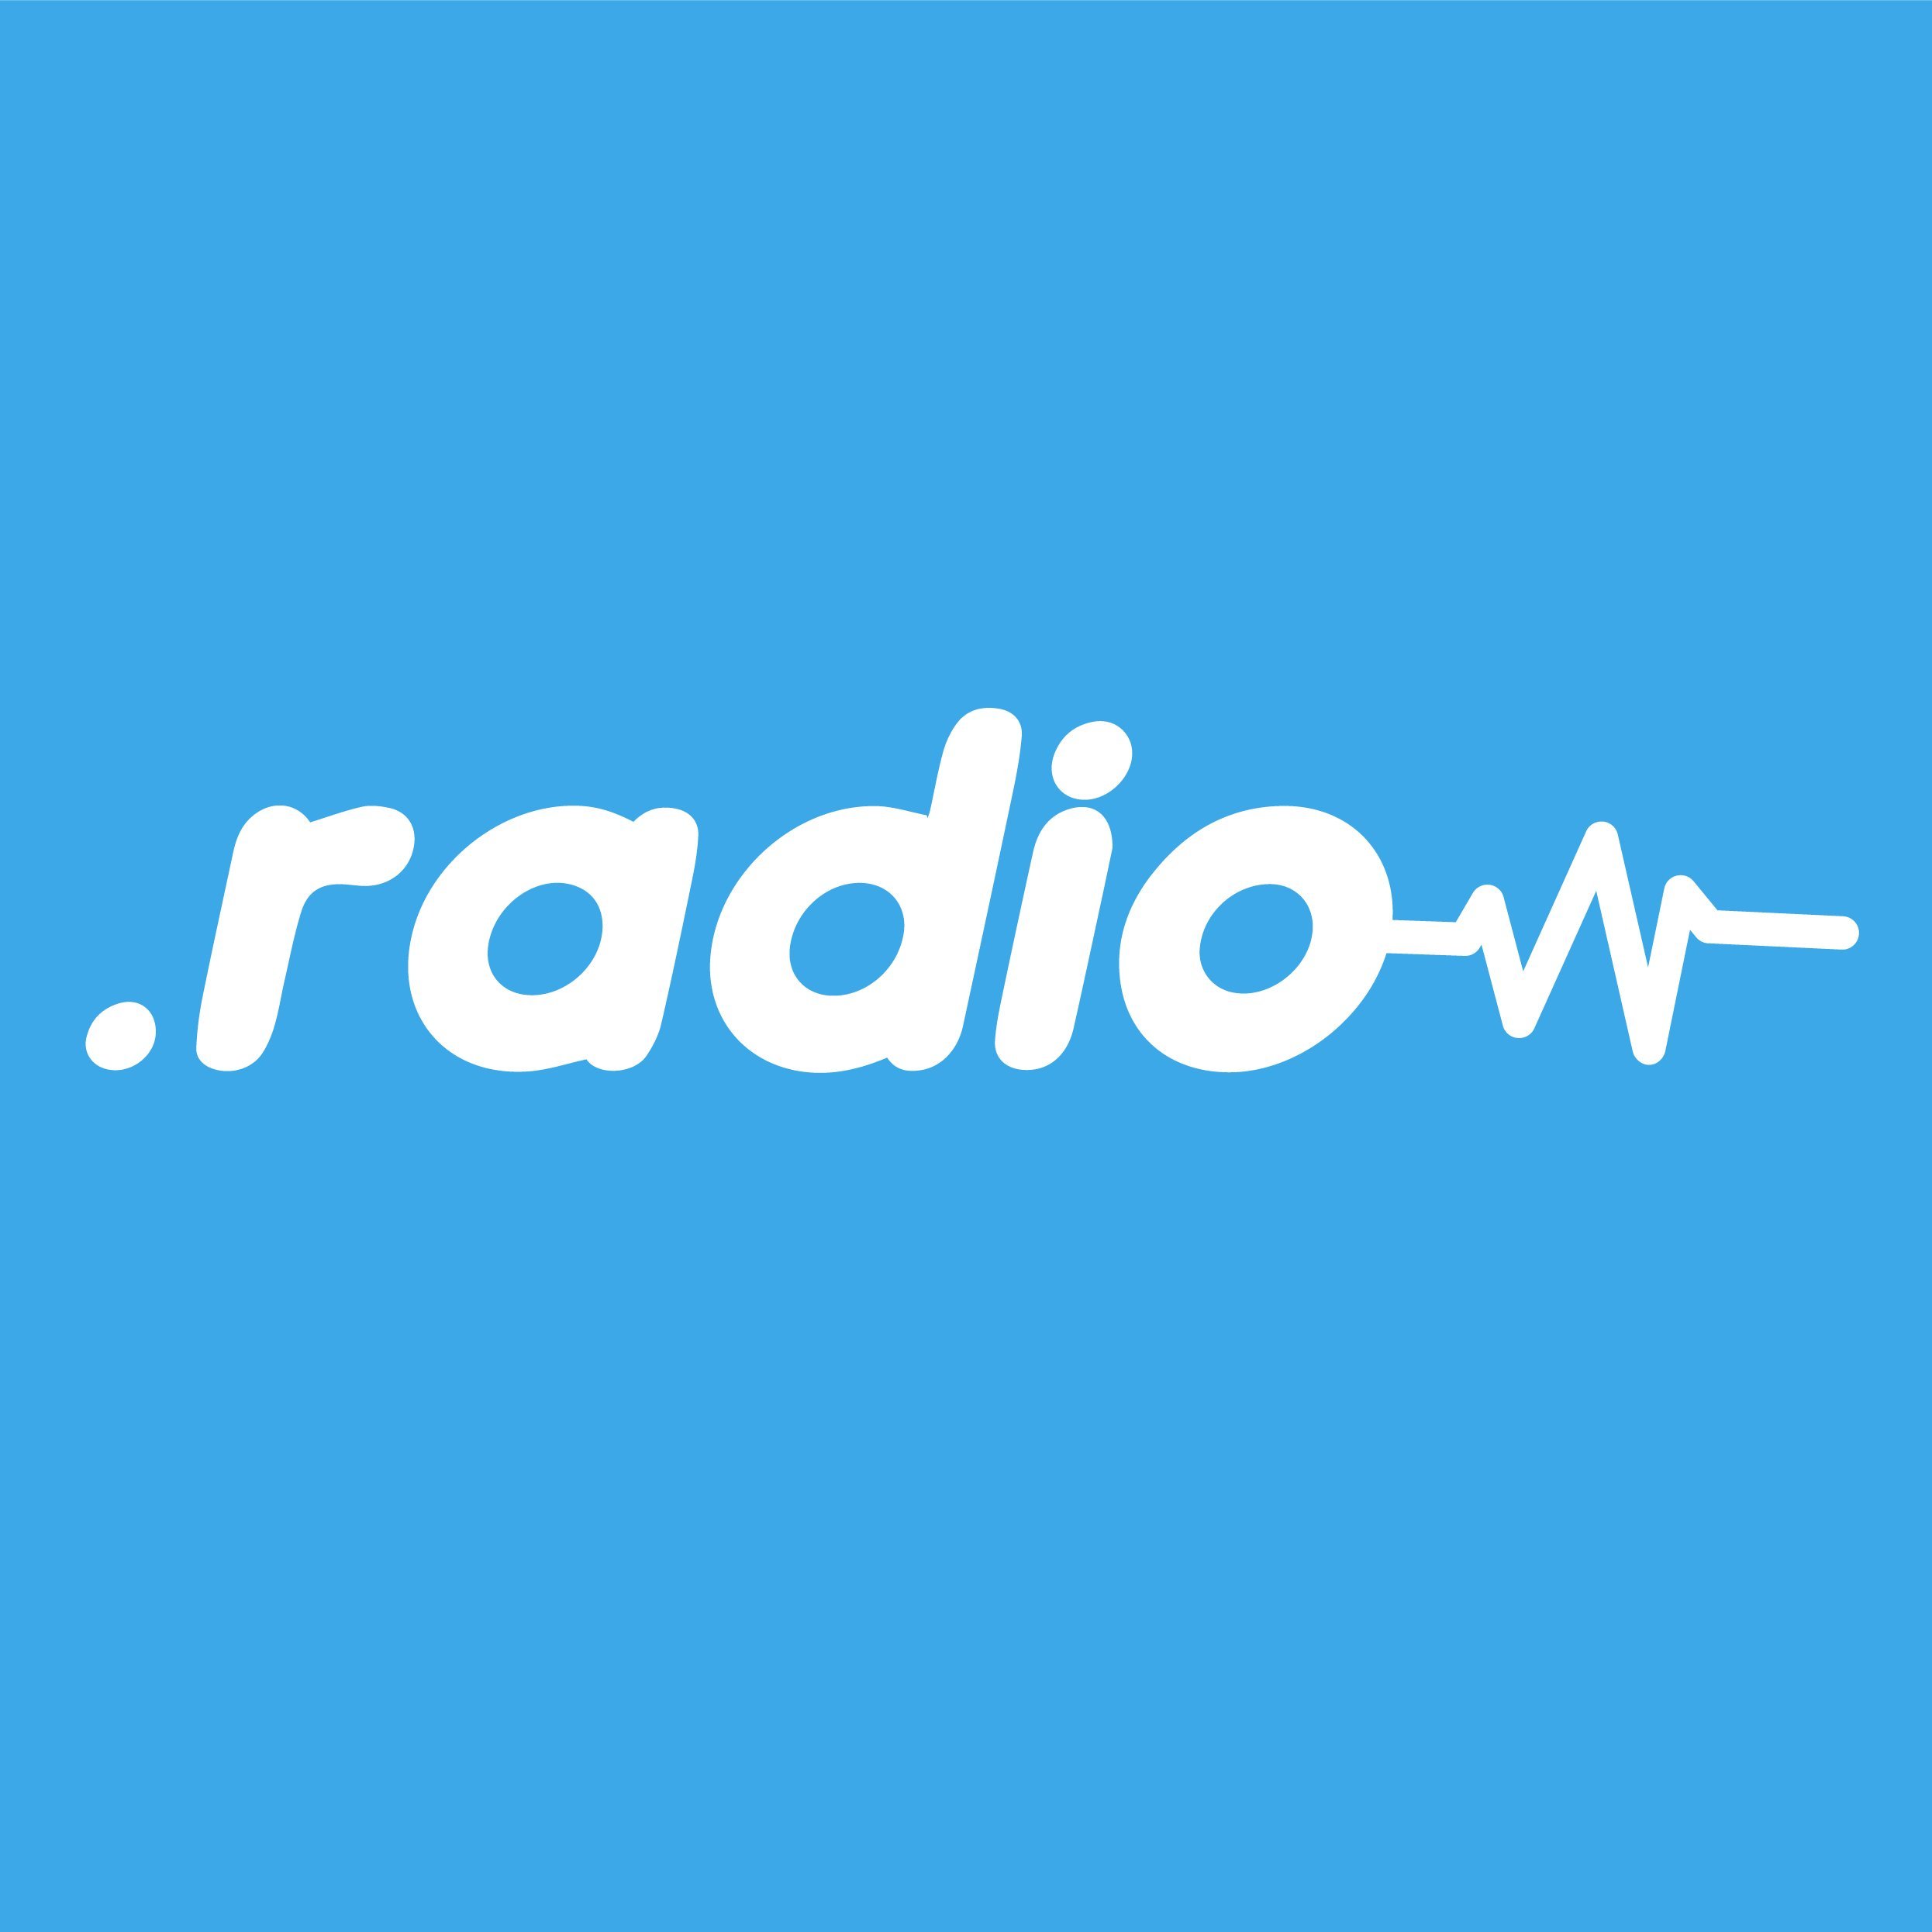 #DotRadio is THE OFFICIAL internet domain for the radio world, available to every radio related website. Register at https://t.co/uIuxz6aDR1 | Supported by @ICANN